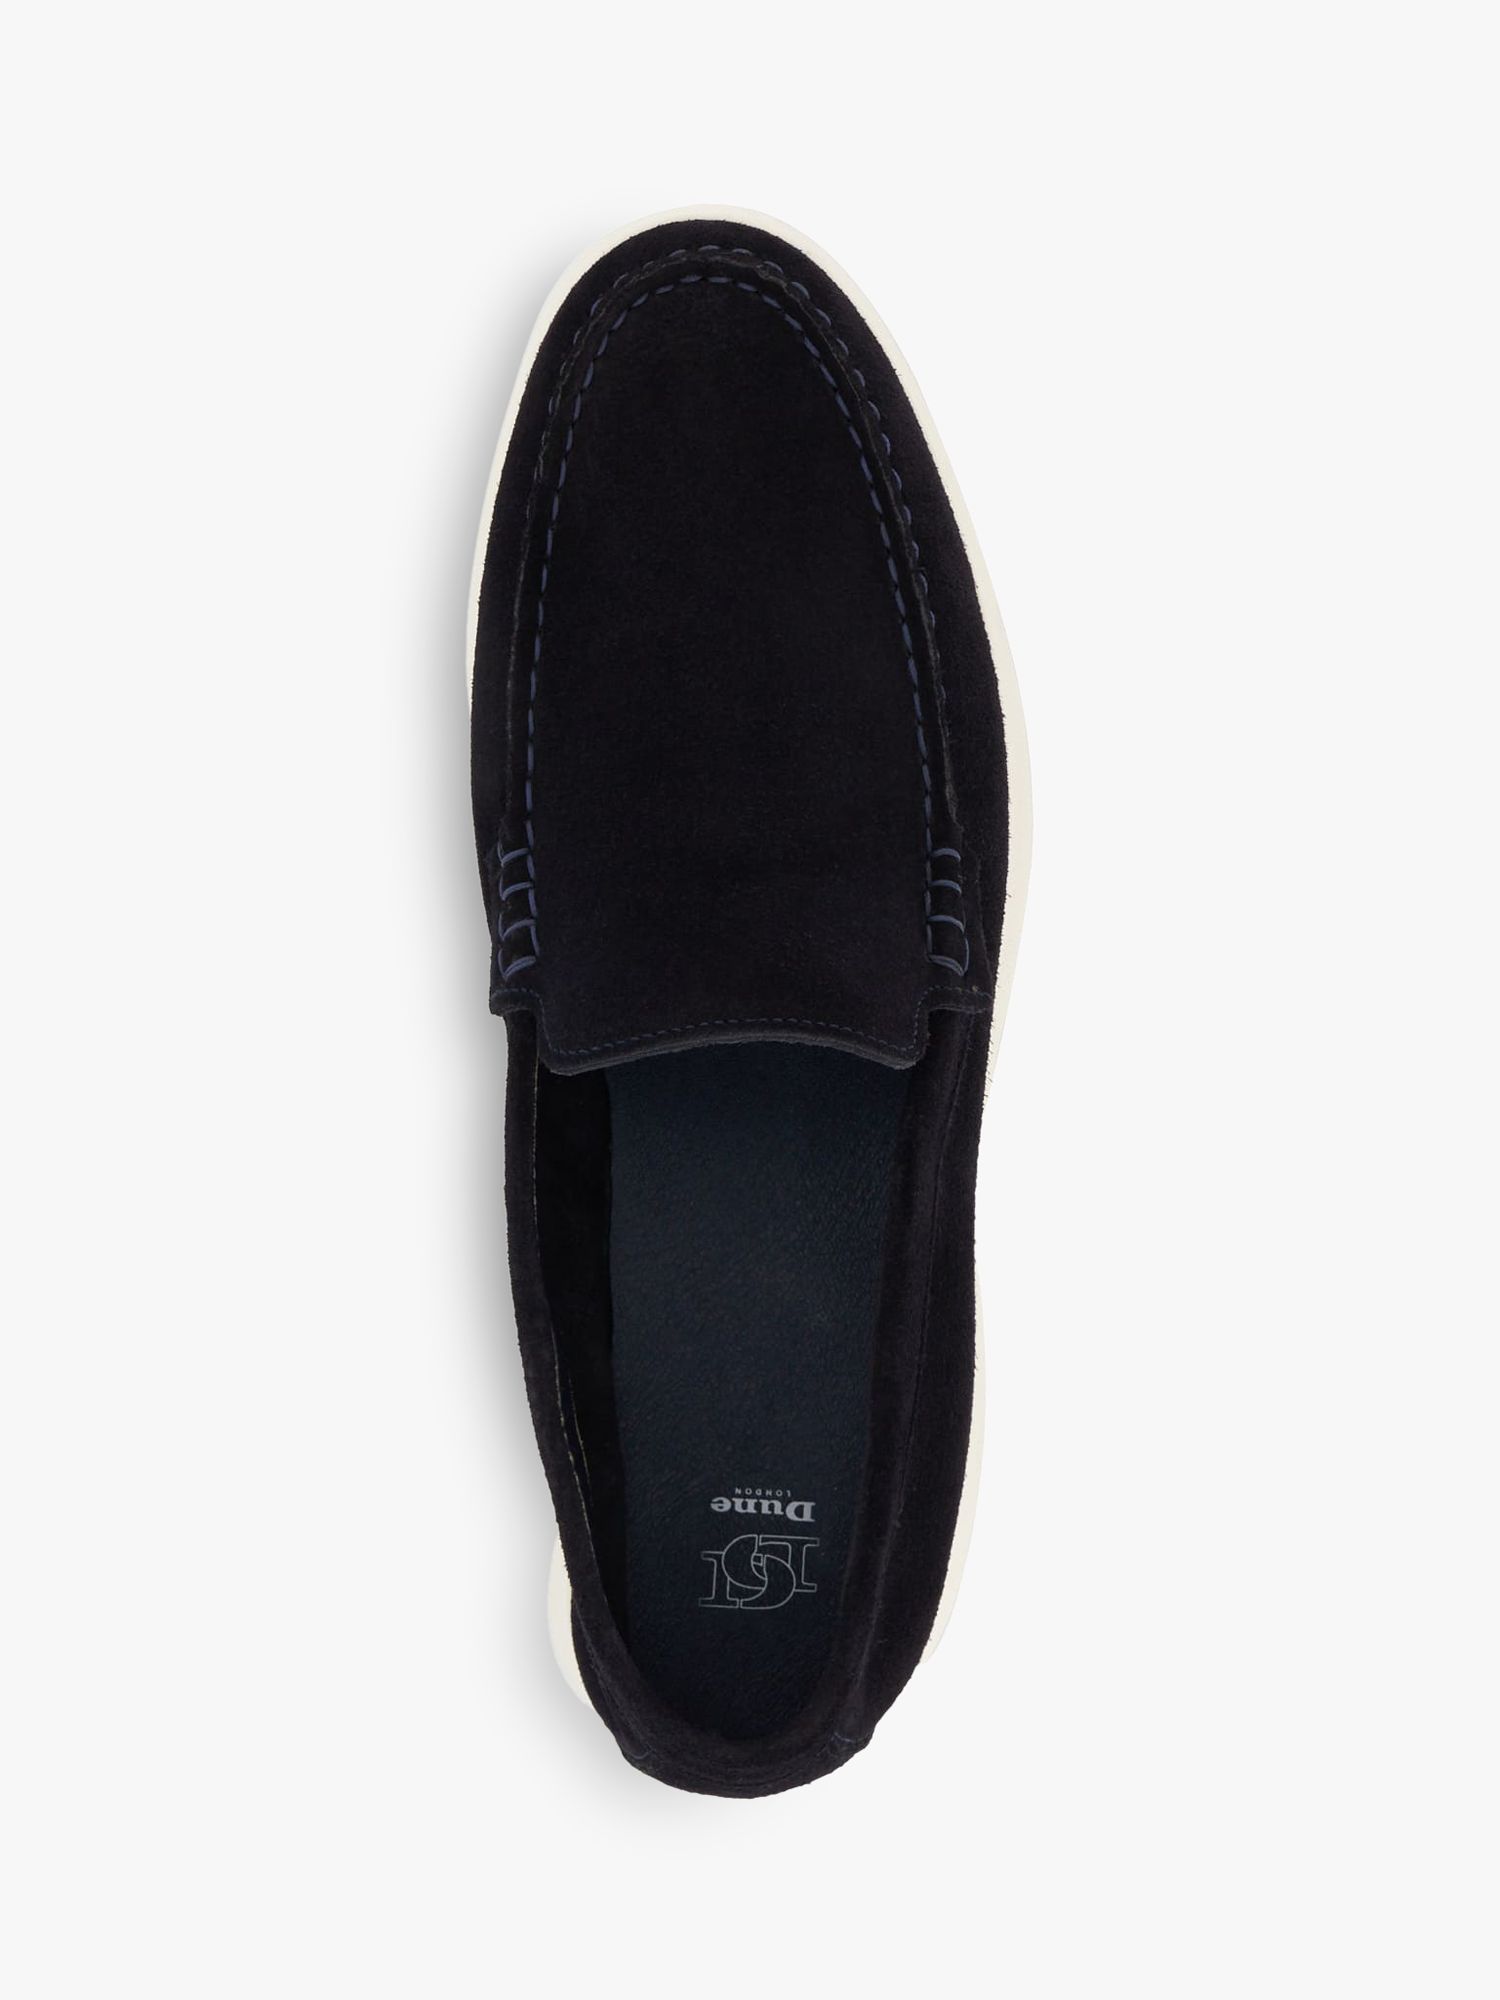 Buy Dune Buftonn Casual Suede Loafers Online at johnlewis.com